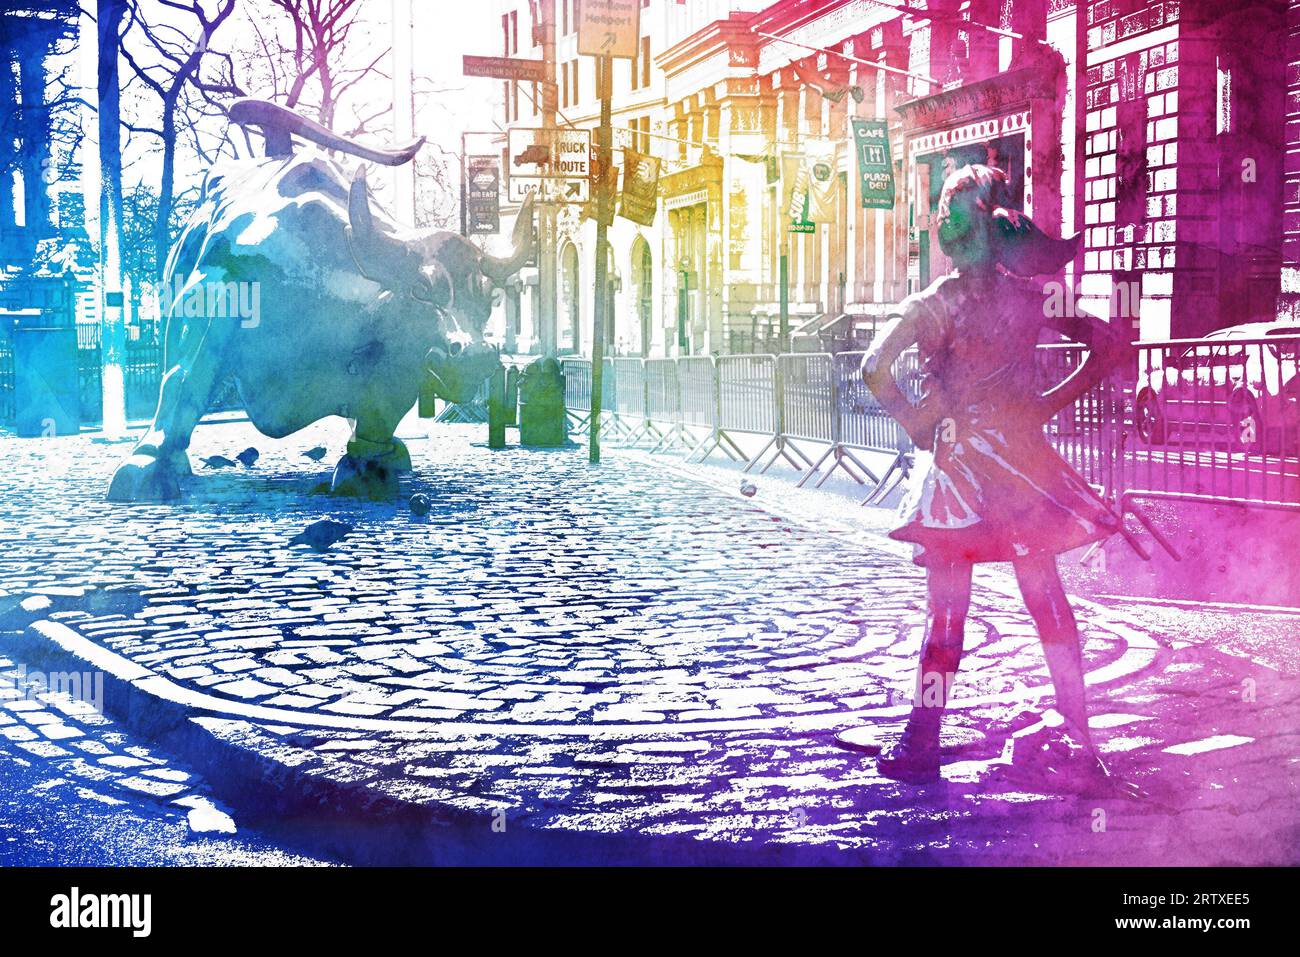 Illustration of the Fearless Girl and Charging Bull Statues in Lower Manhattan. Stock Photo